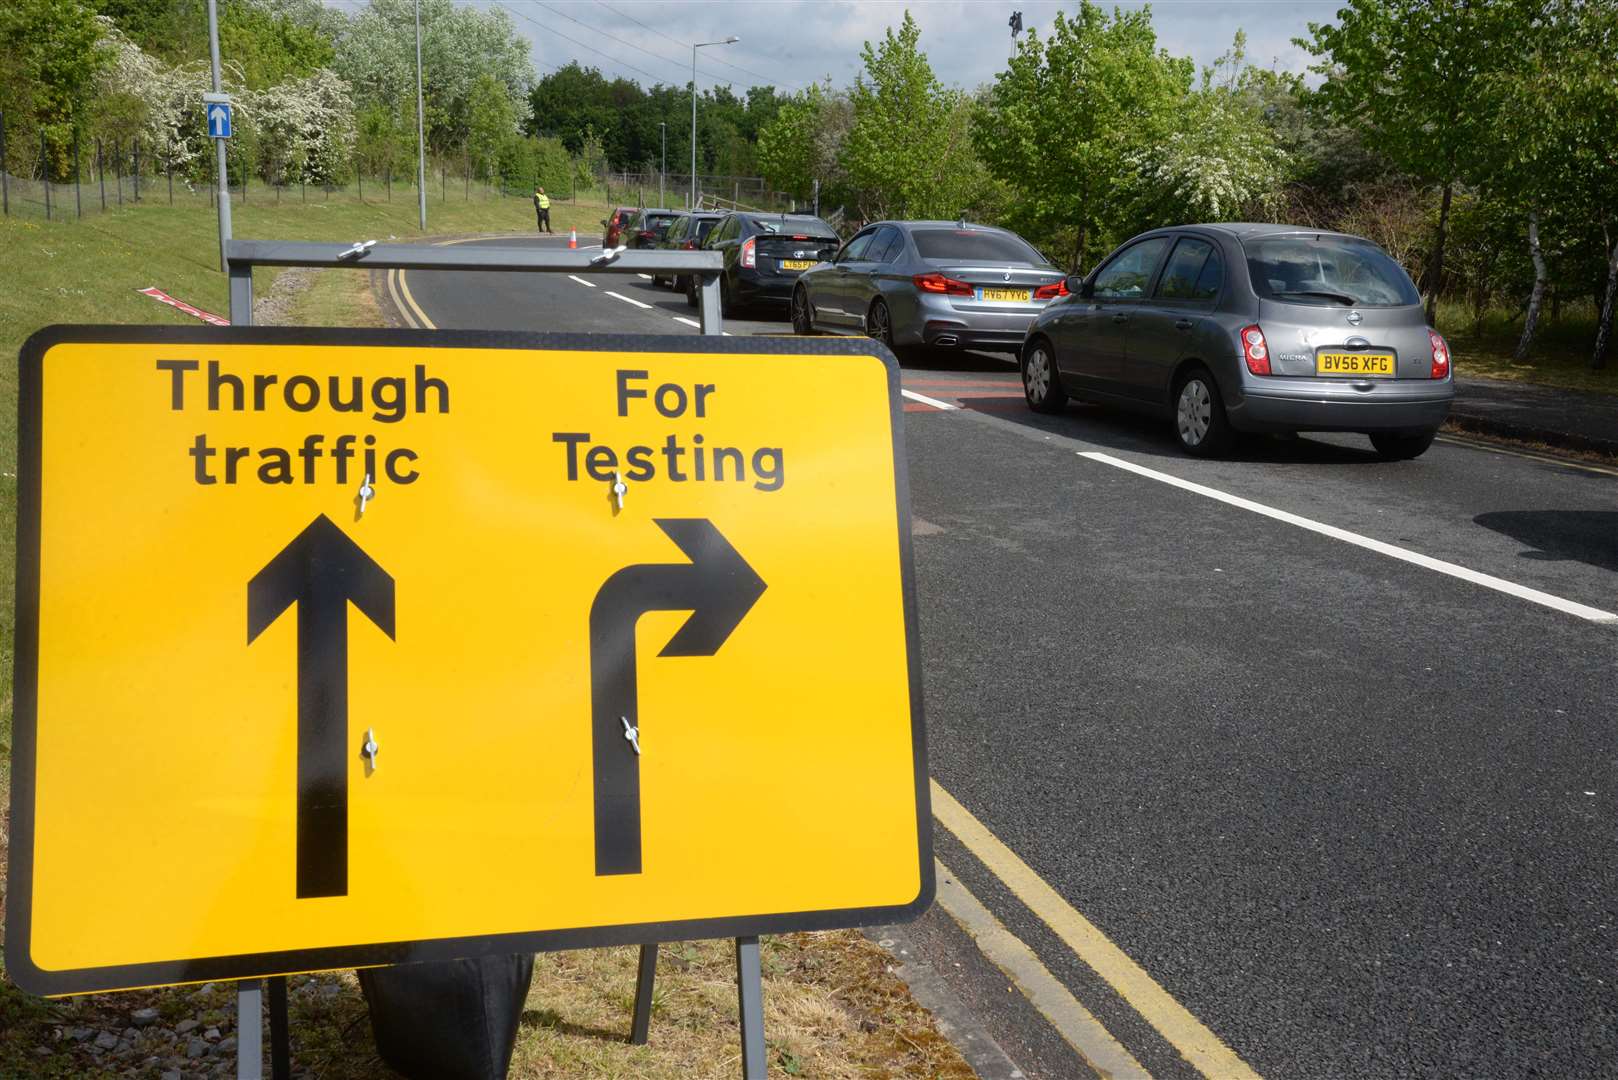 Vehicles queue to enter the Coronavirus testing centre set up in one of the car parks at Ebbsfleet International. Picture: Chris Davey